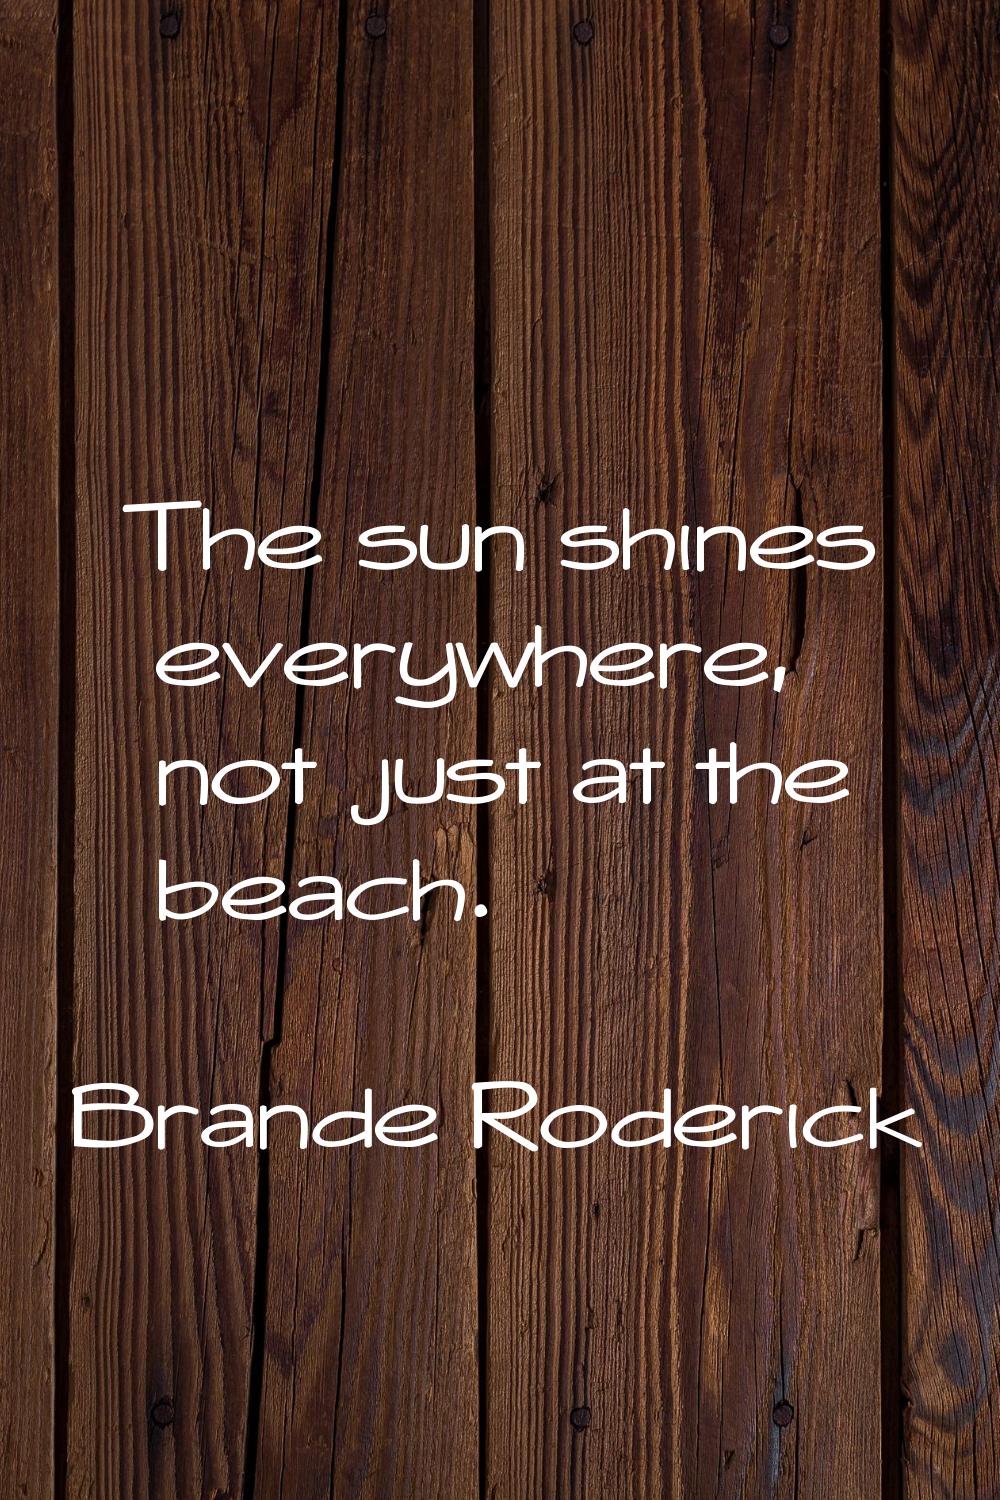 The sun shines everywhere, not just at the beach.